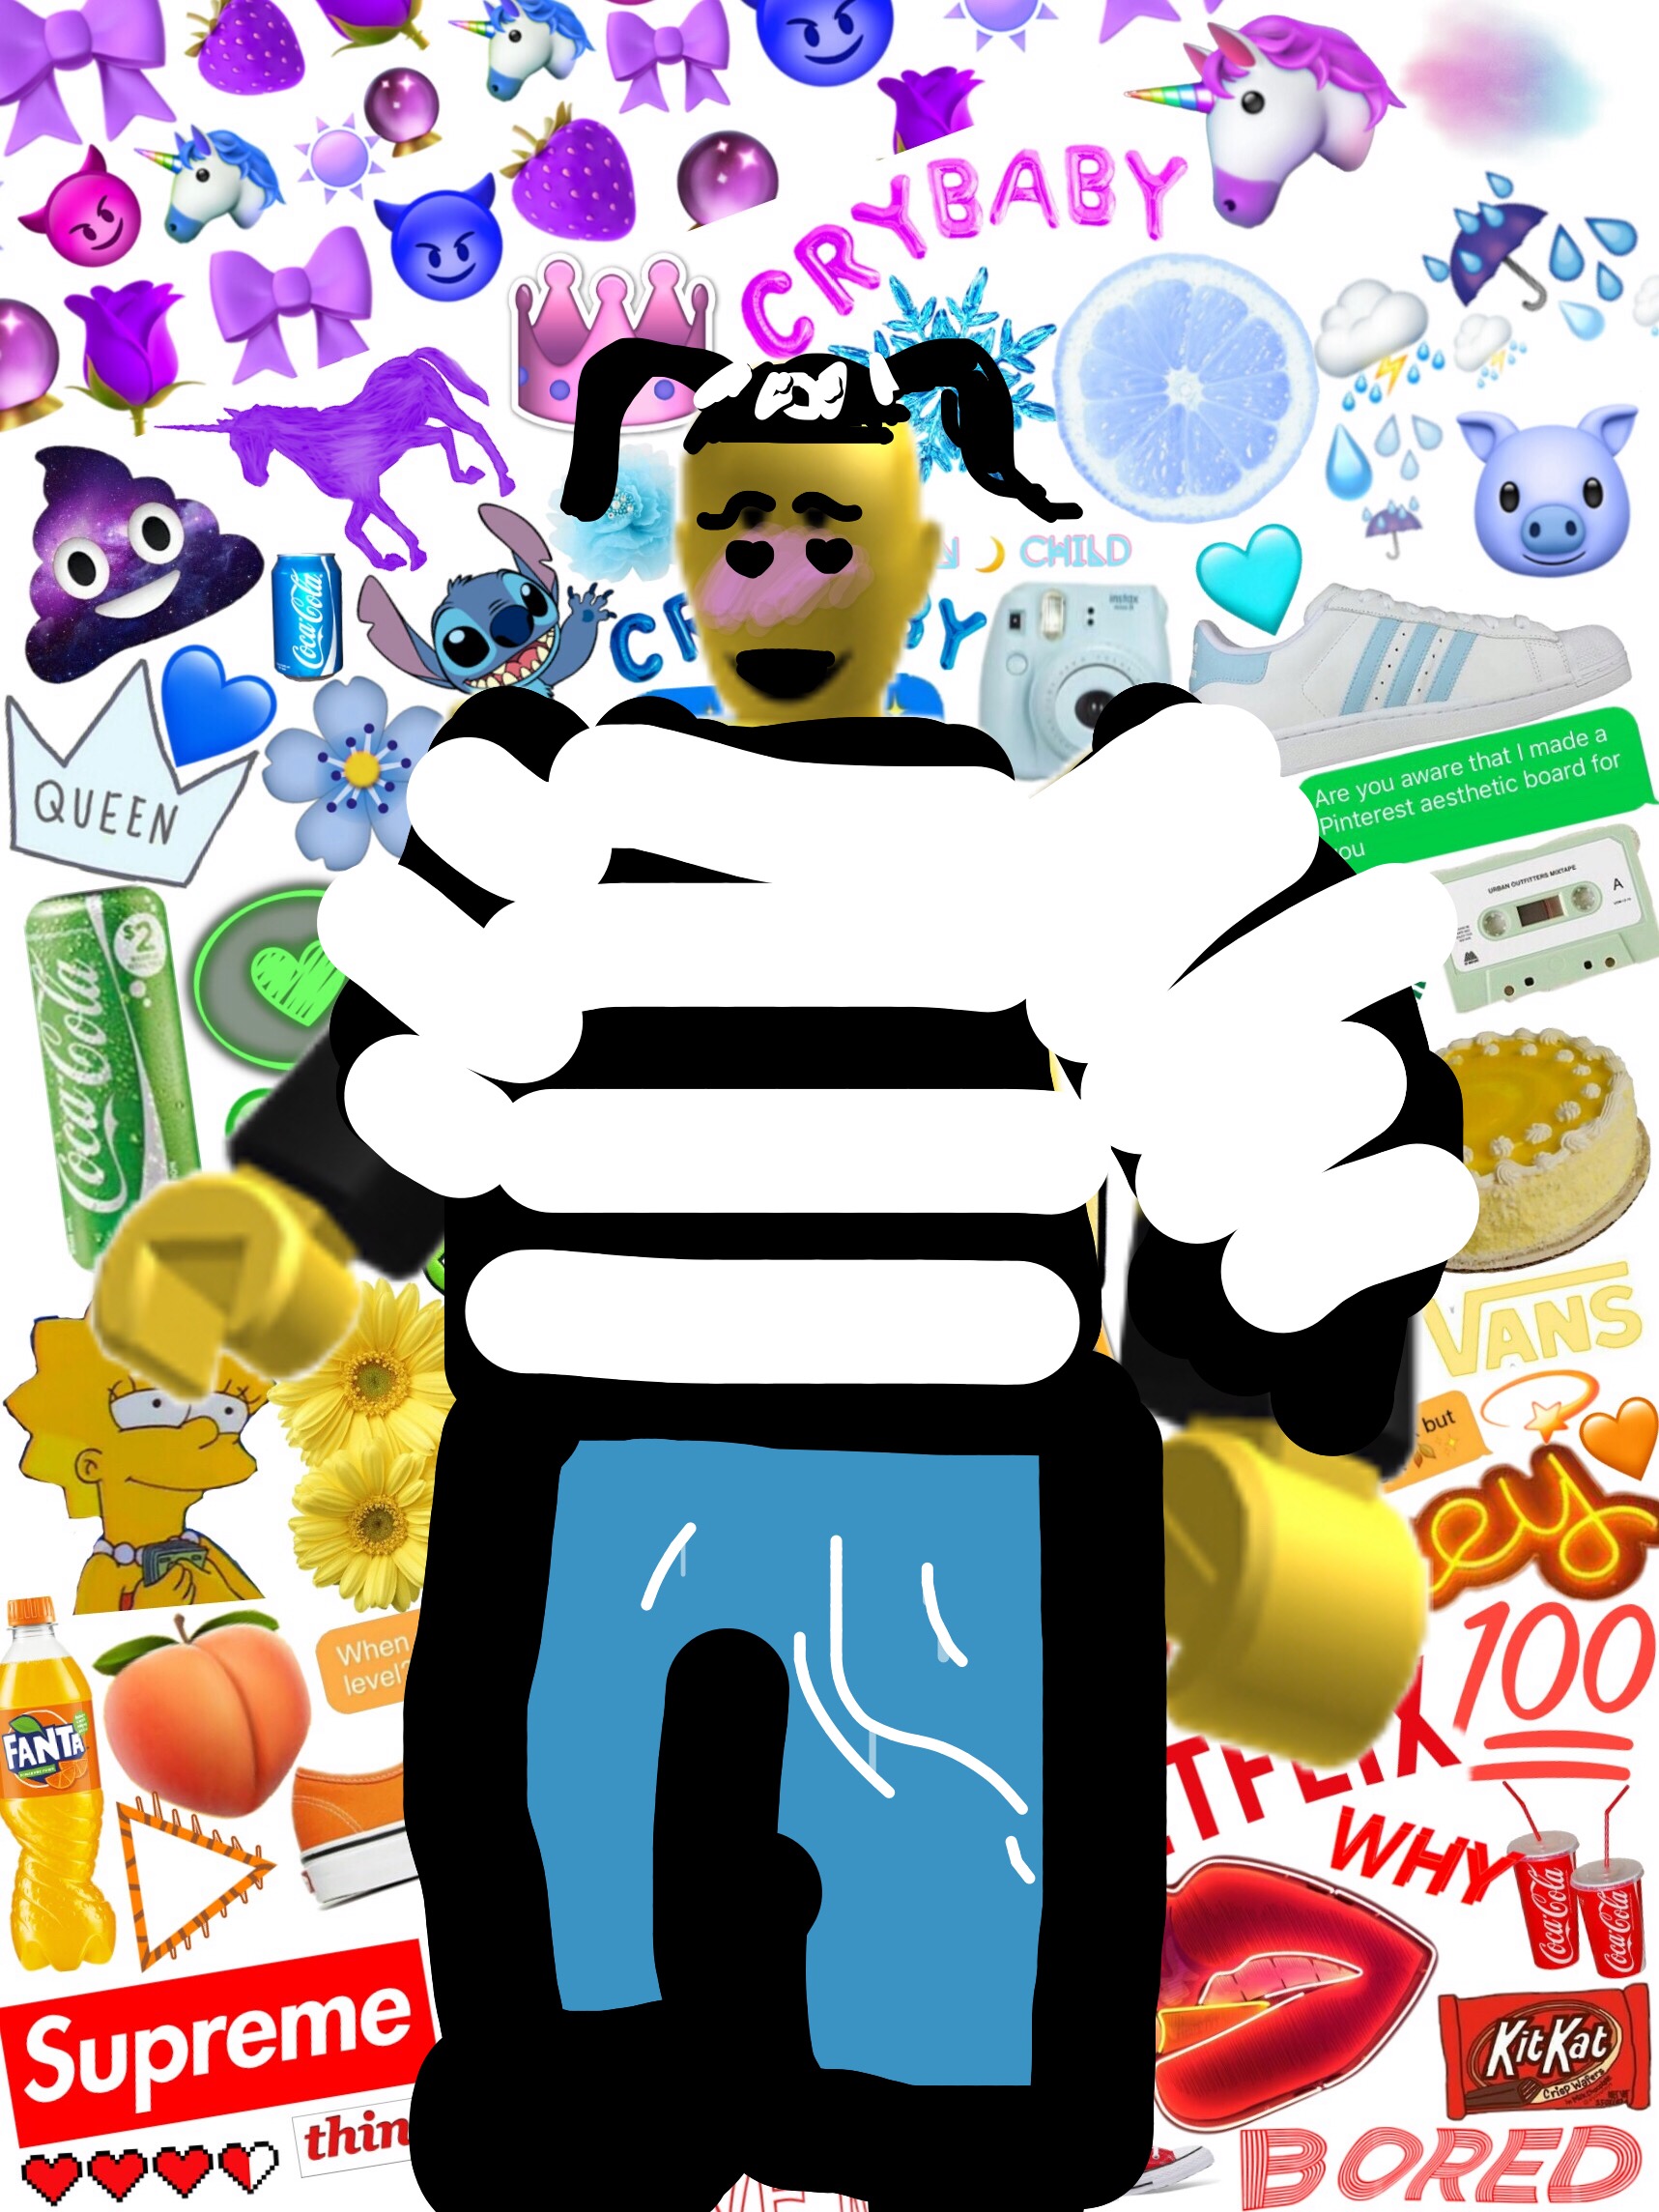 Eboy Roblox Buy Robux Now - pb bugmenot roblox with robux roblox robux us